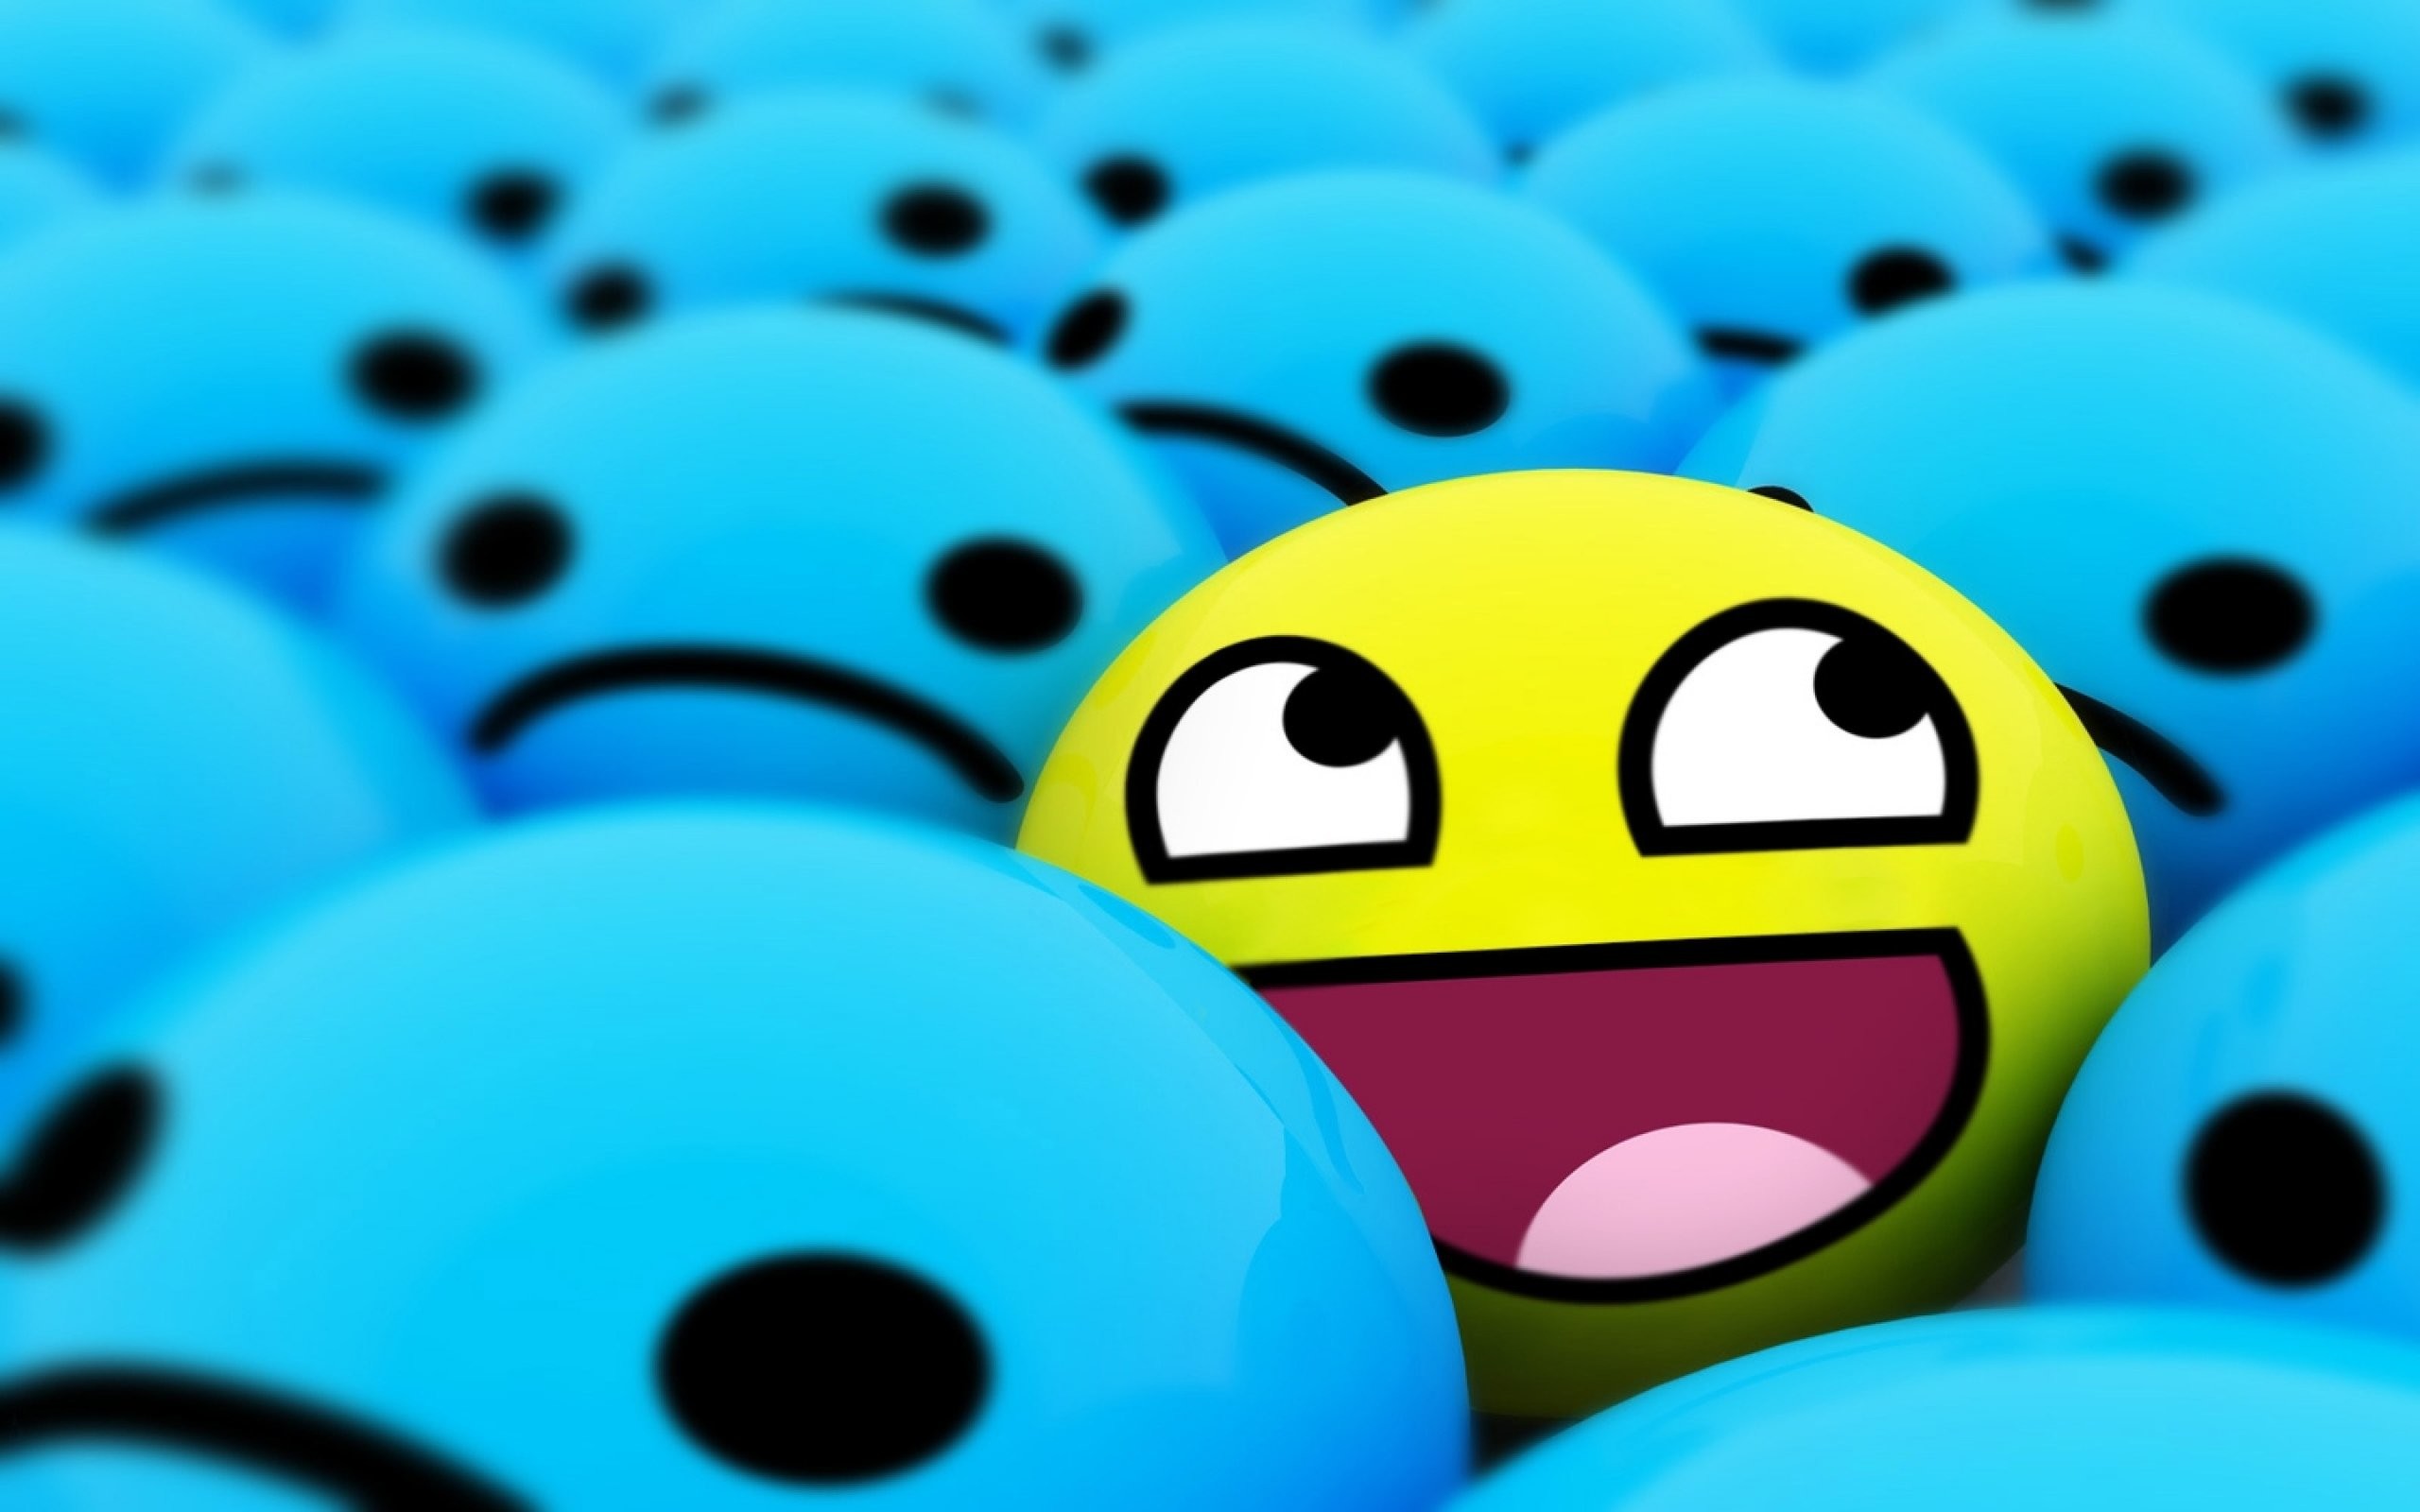 2560x1600 Awesome Smiley Face 871541 ...